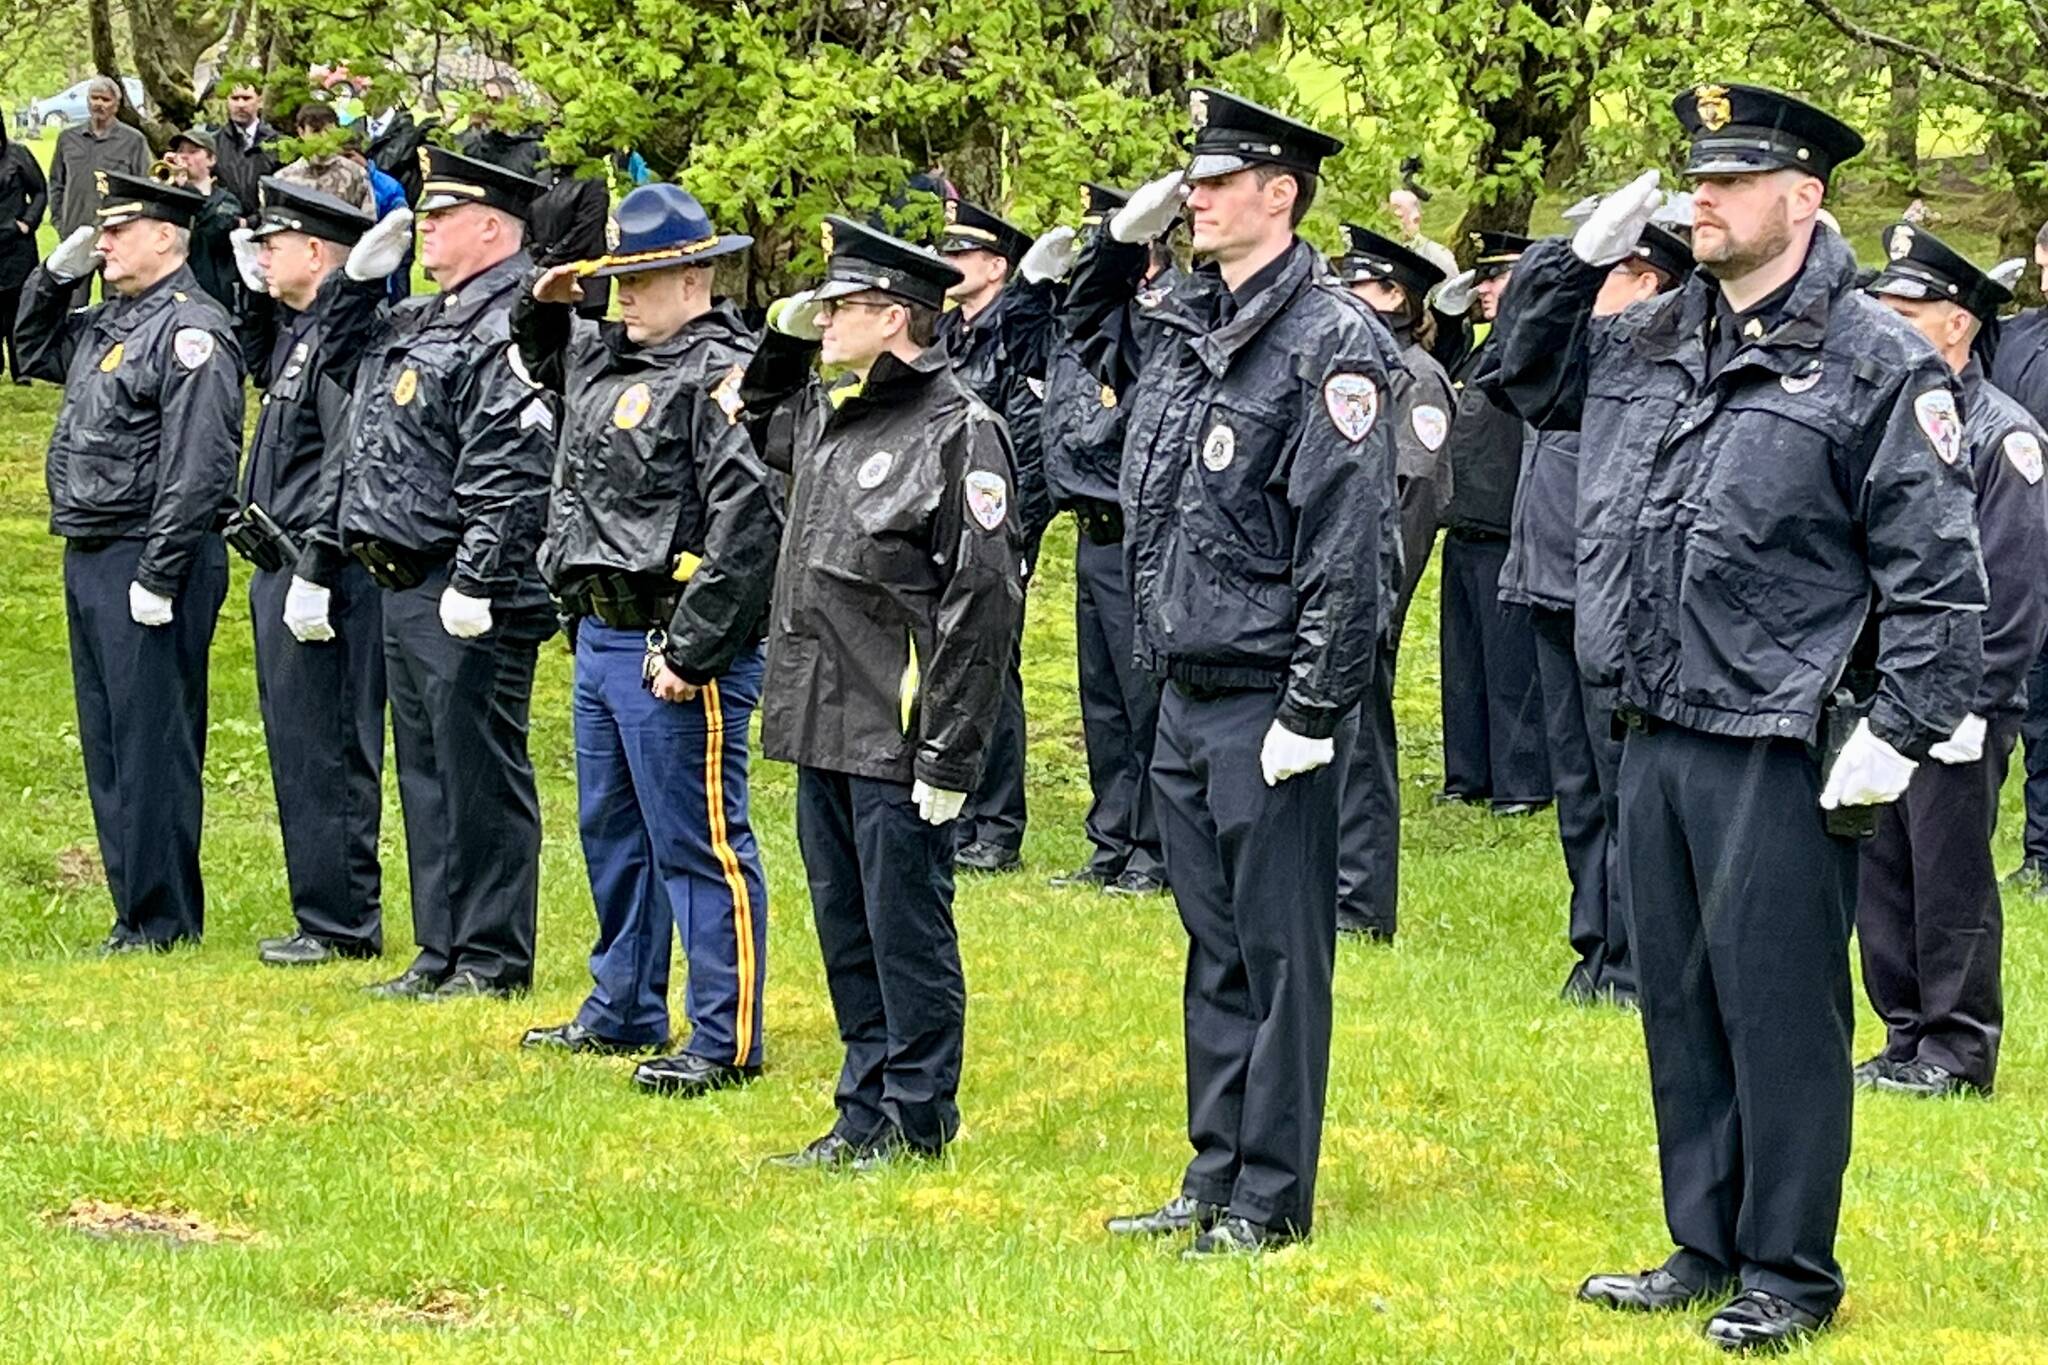 Members of the Juneau Police Department stand at attention to honor fallen officers on Friday during the Alaska Peace Officers Association’s annual memorial service at Evergreen Cemetery. (Jonson Kuhn / Juneau Empire)